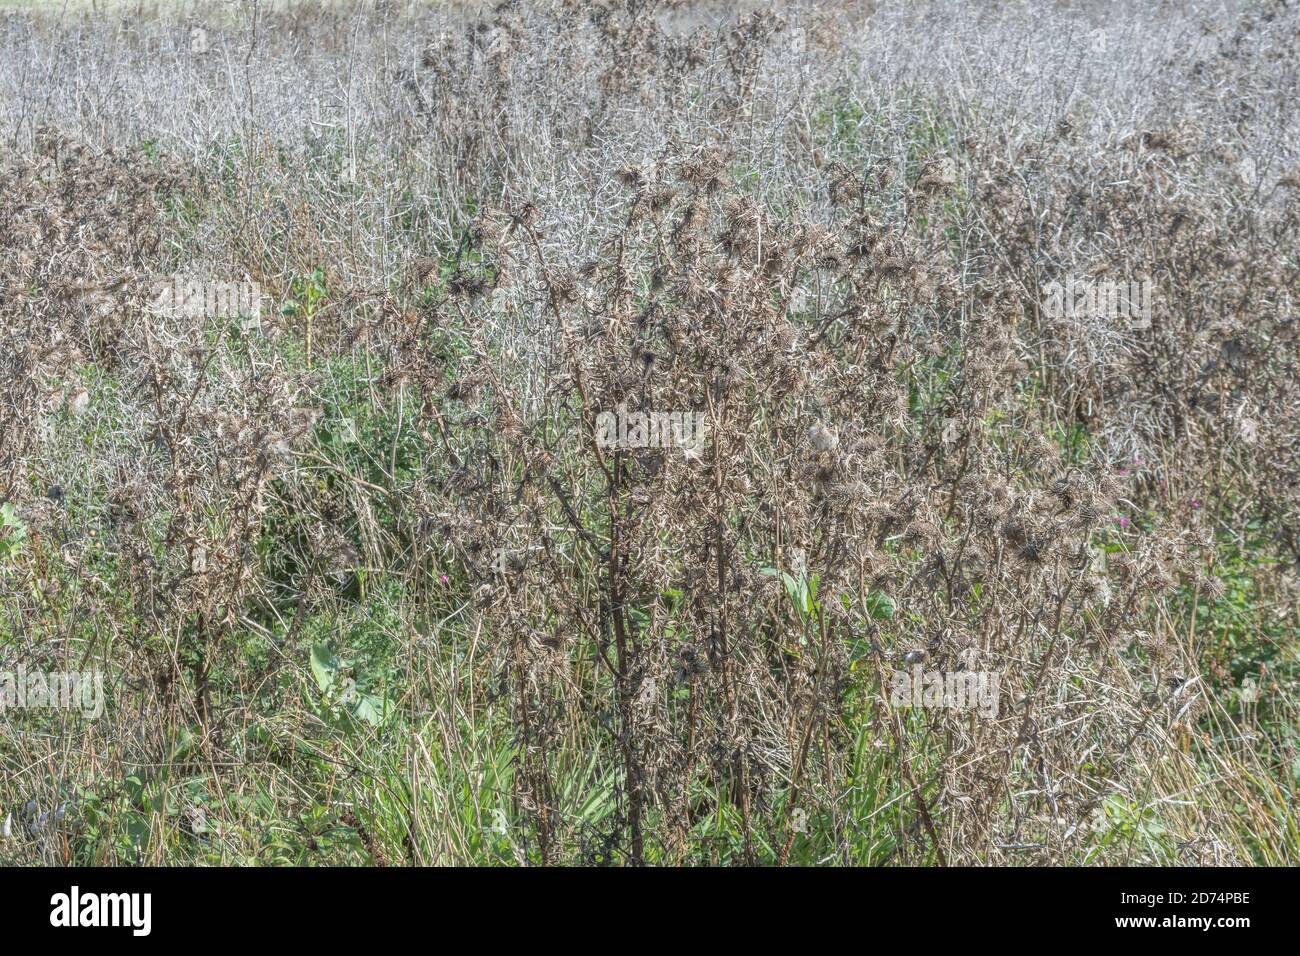 Field overgrown by a mass of common agricultural weeds including Spear Thistle / Cirsium vulgare. For invasive weeds or plant, problem weeds. Stock Photo